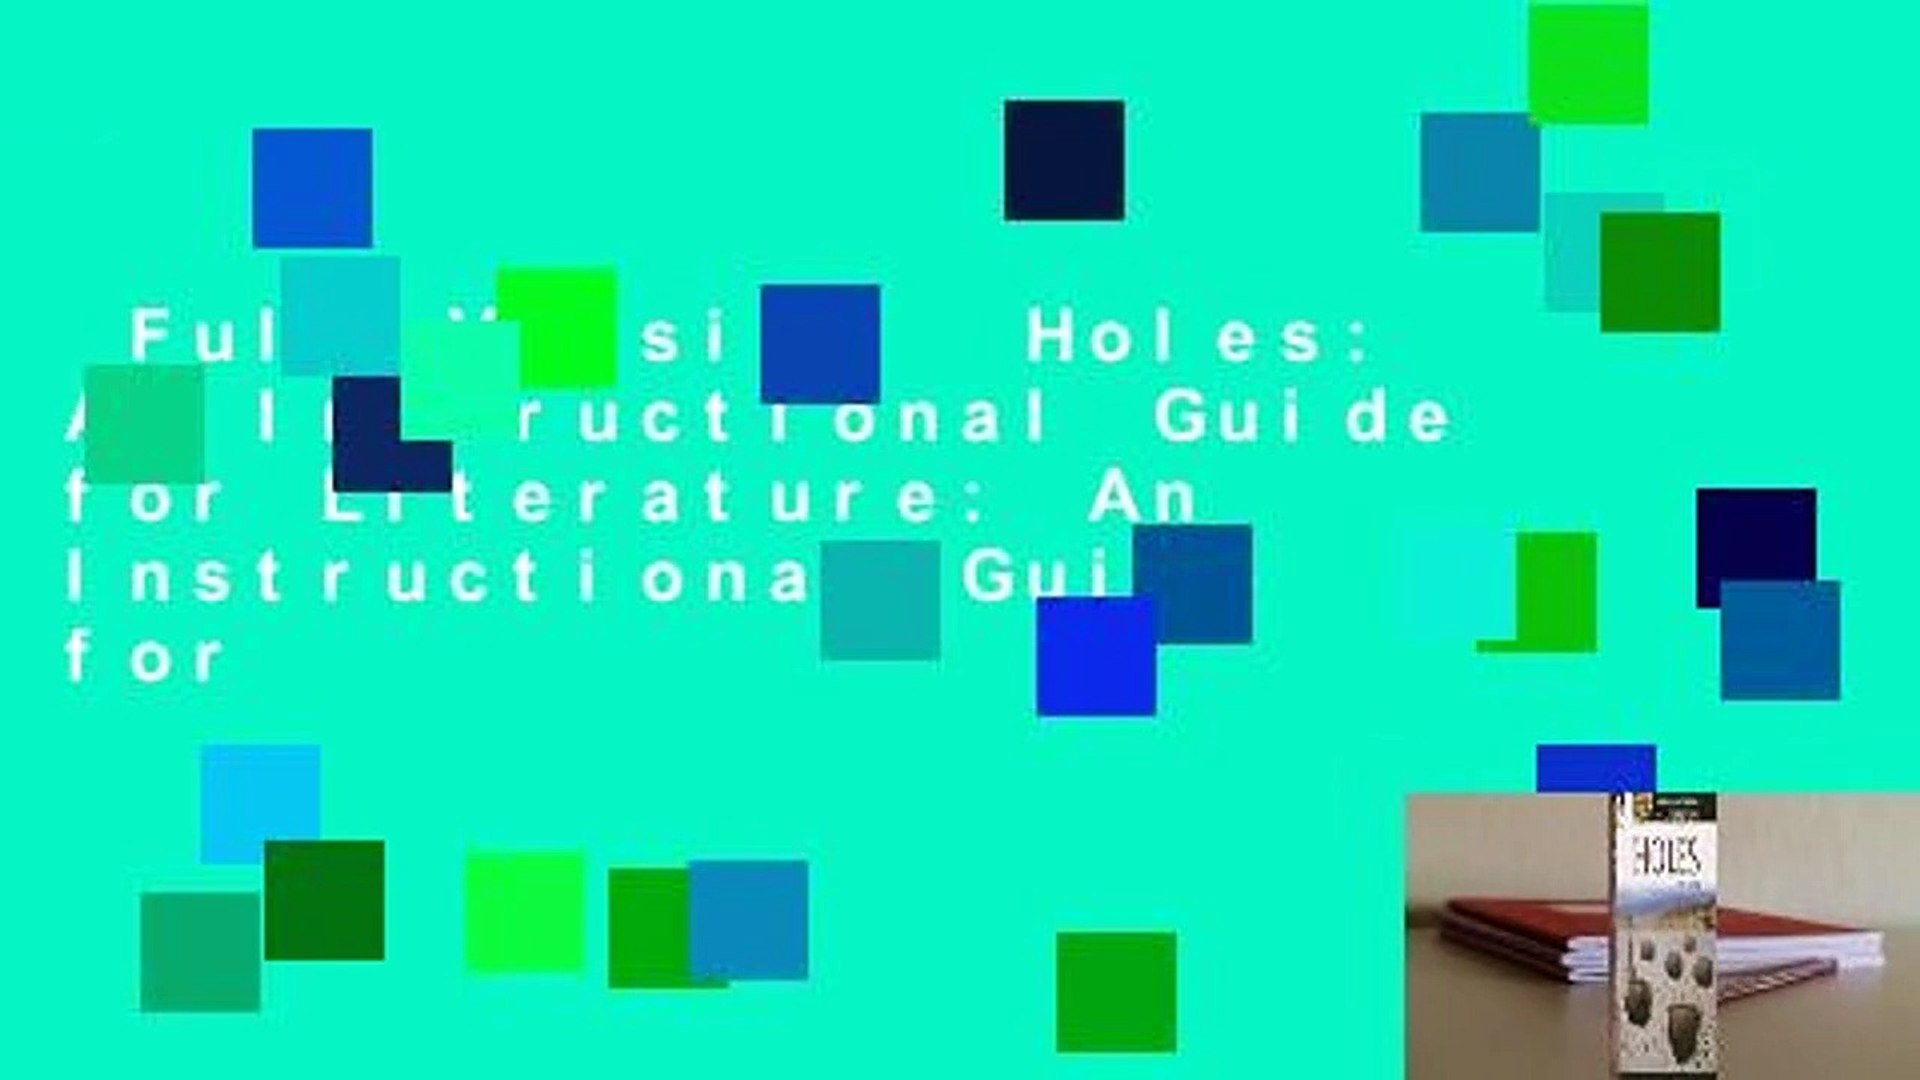 Holes Study Guide Course - Online Video Lessons